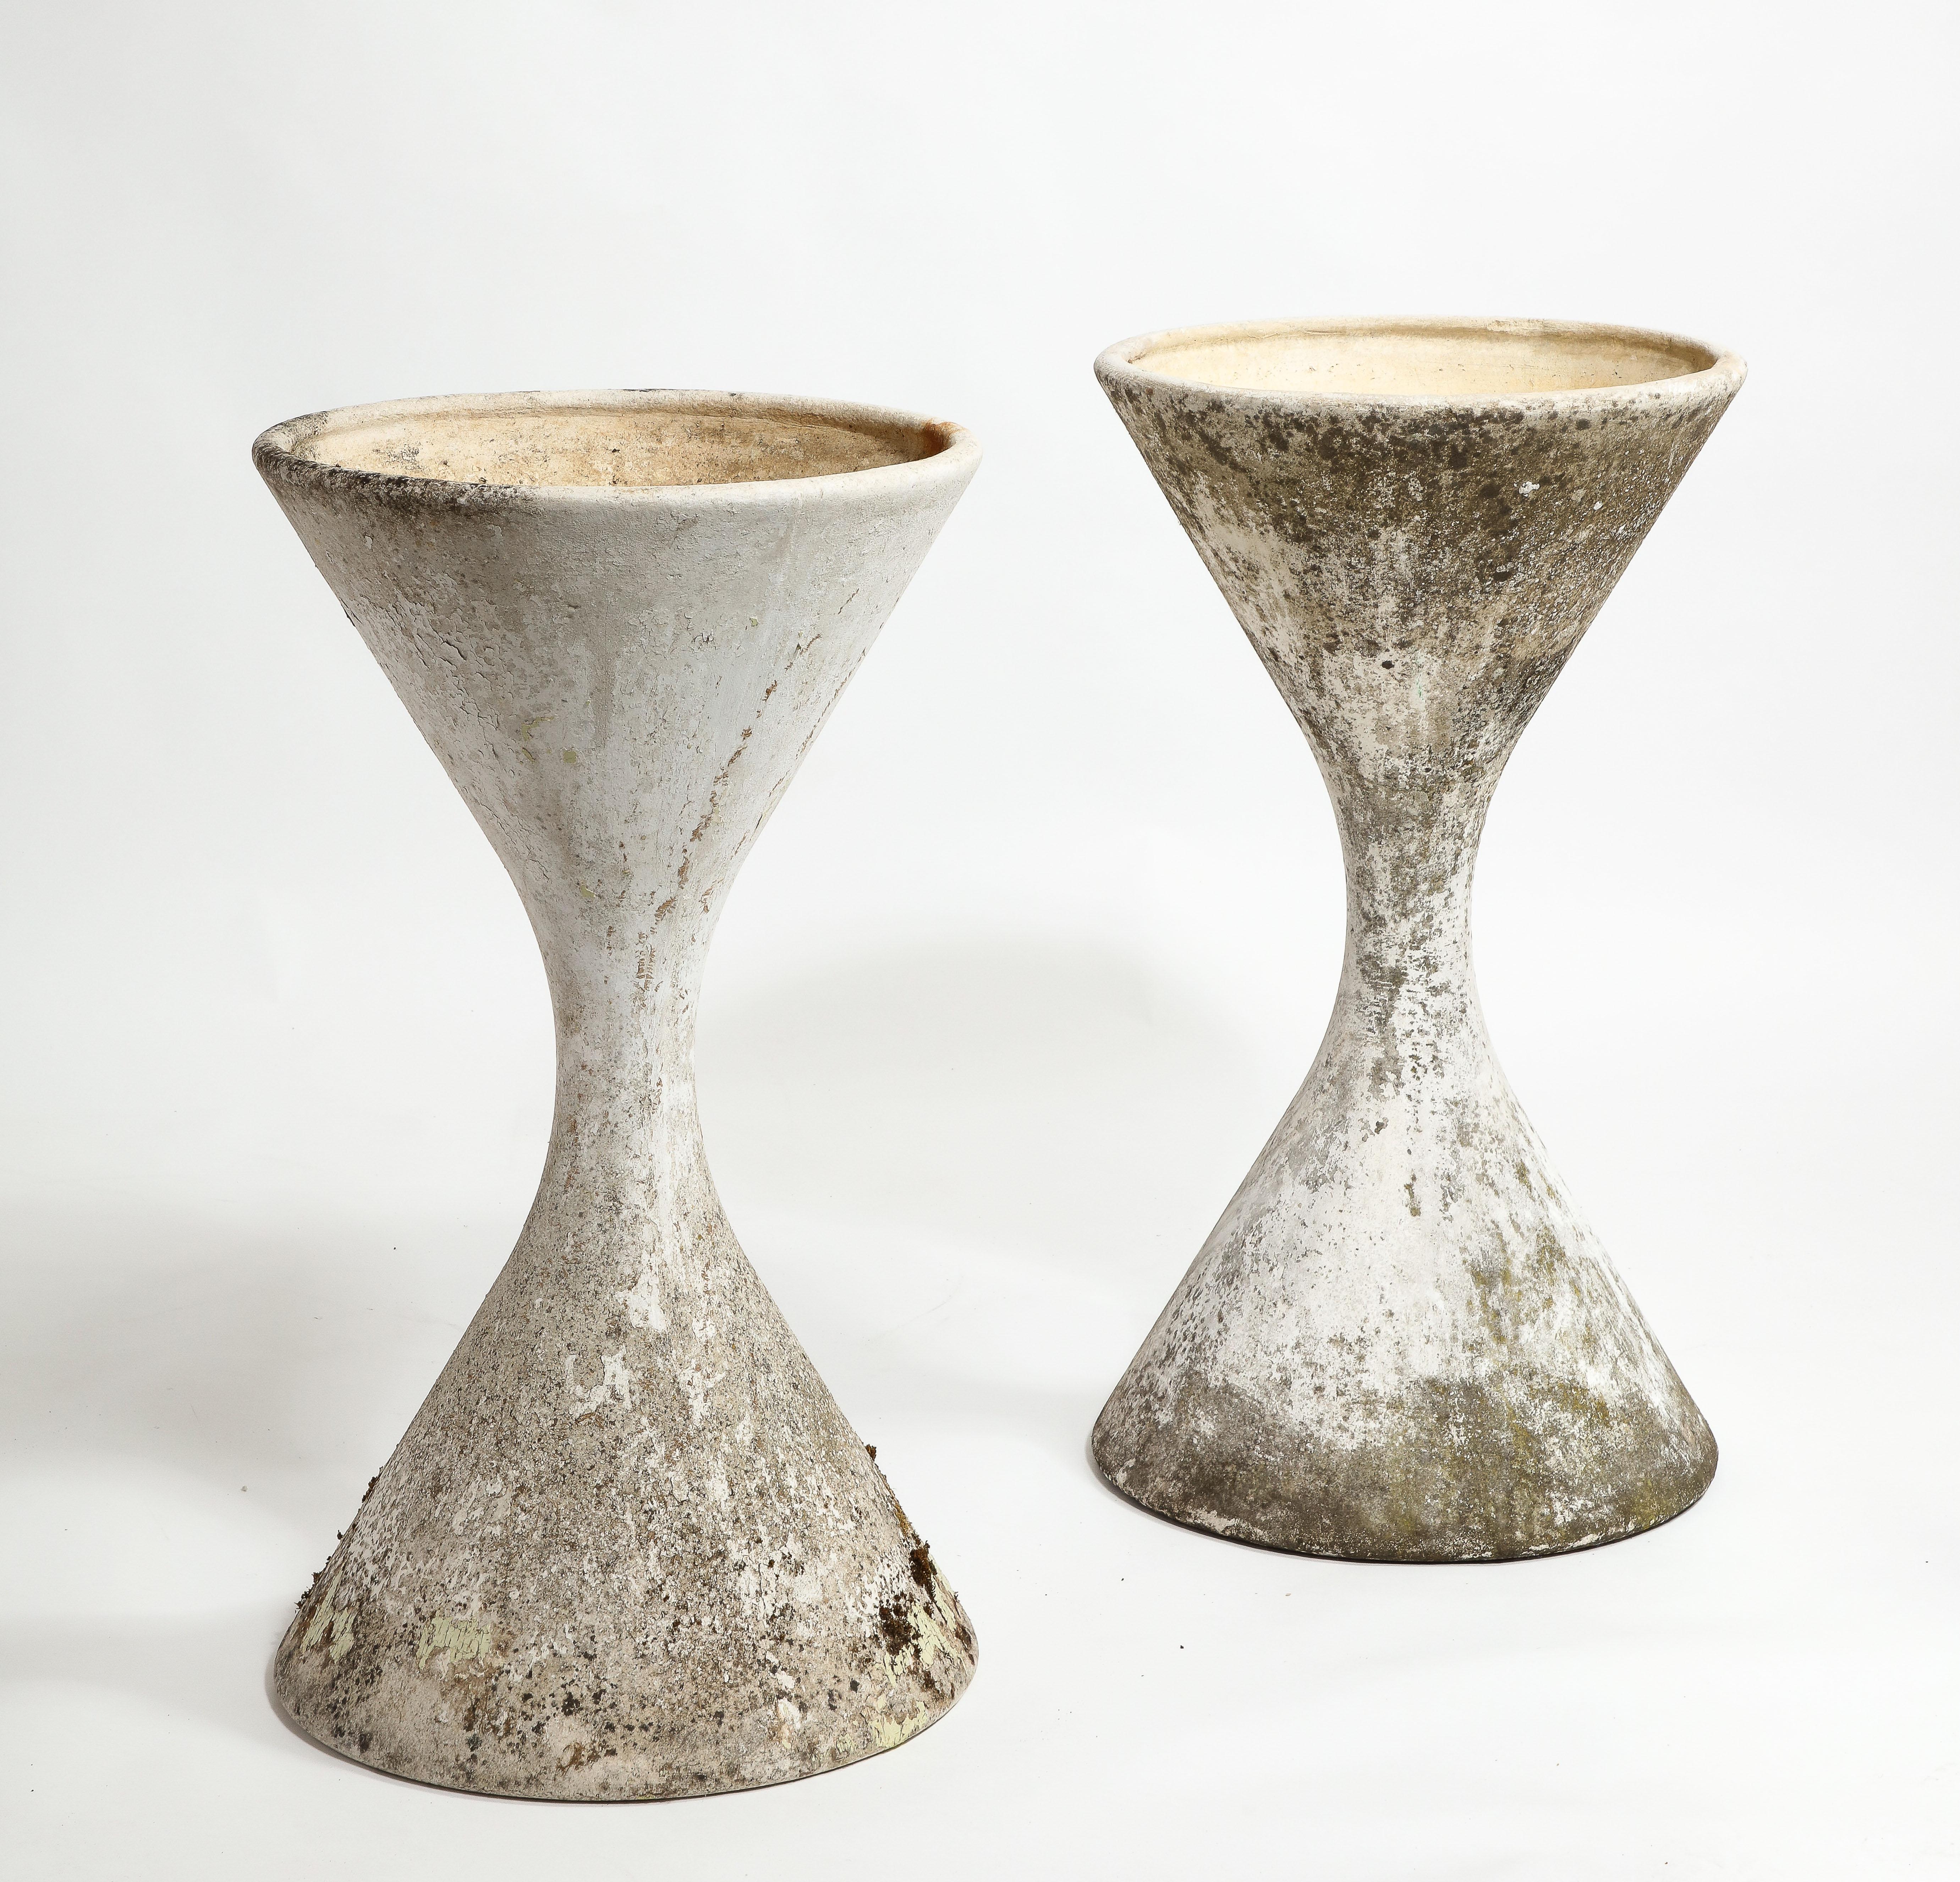 Mid-20th Century Willy Guhl for Eternit Large Concrete Diabolo Spindel Planters, 1960s For Sale